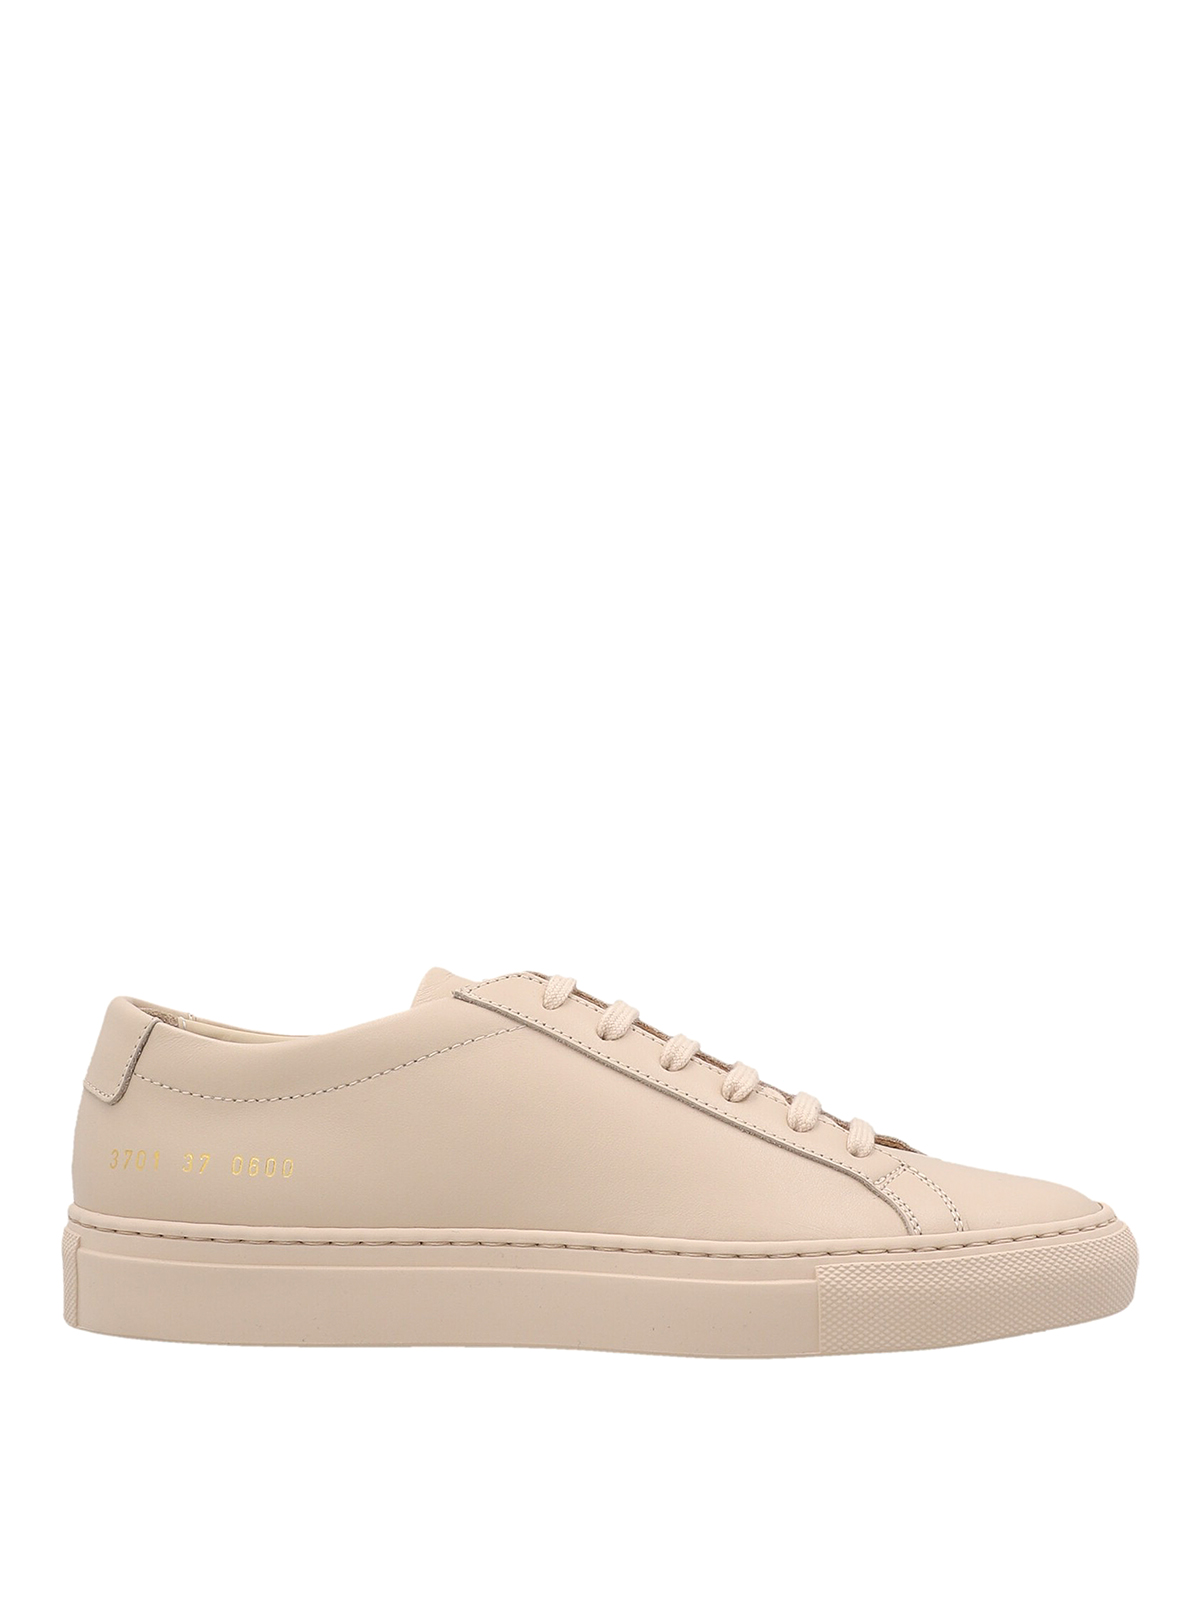 Trainers Common Projects - Achilles Low Sneakers - 37010600 | iKRIX.com